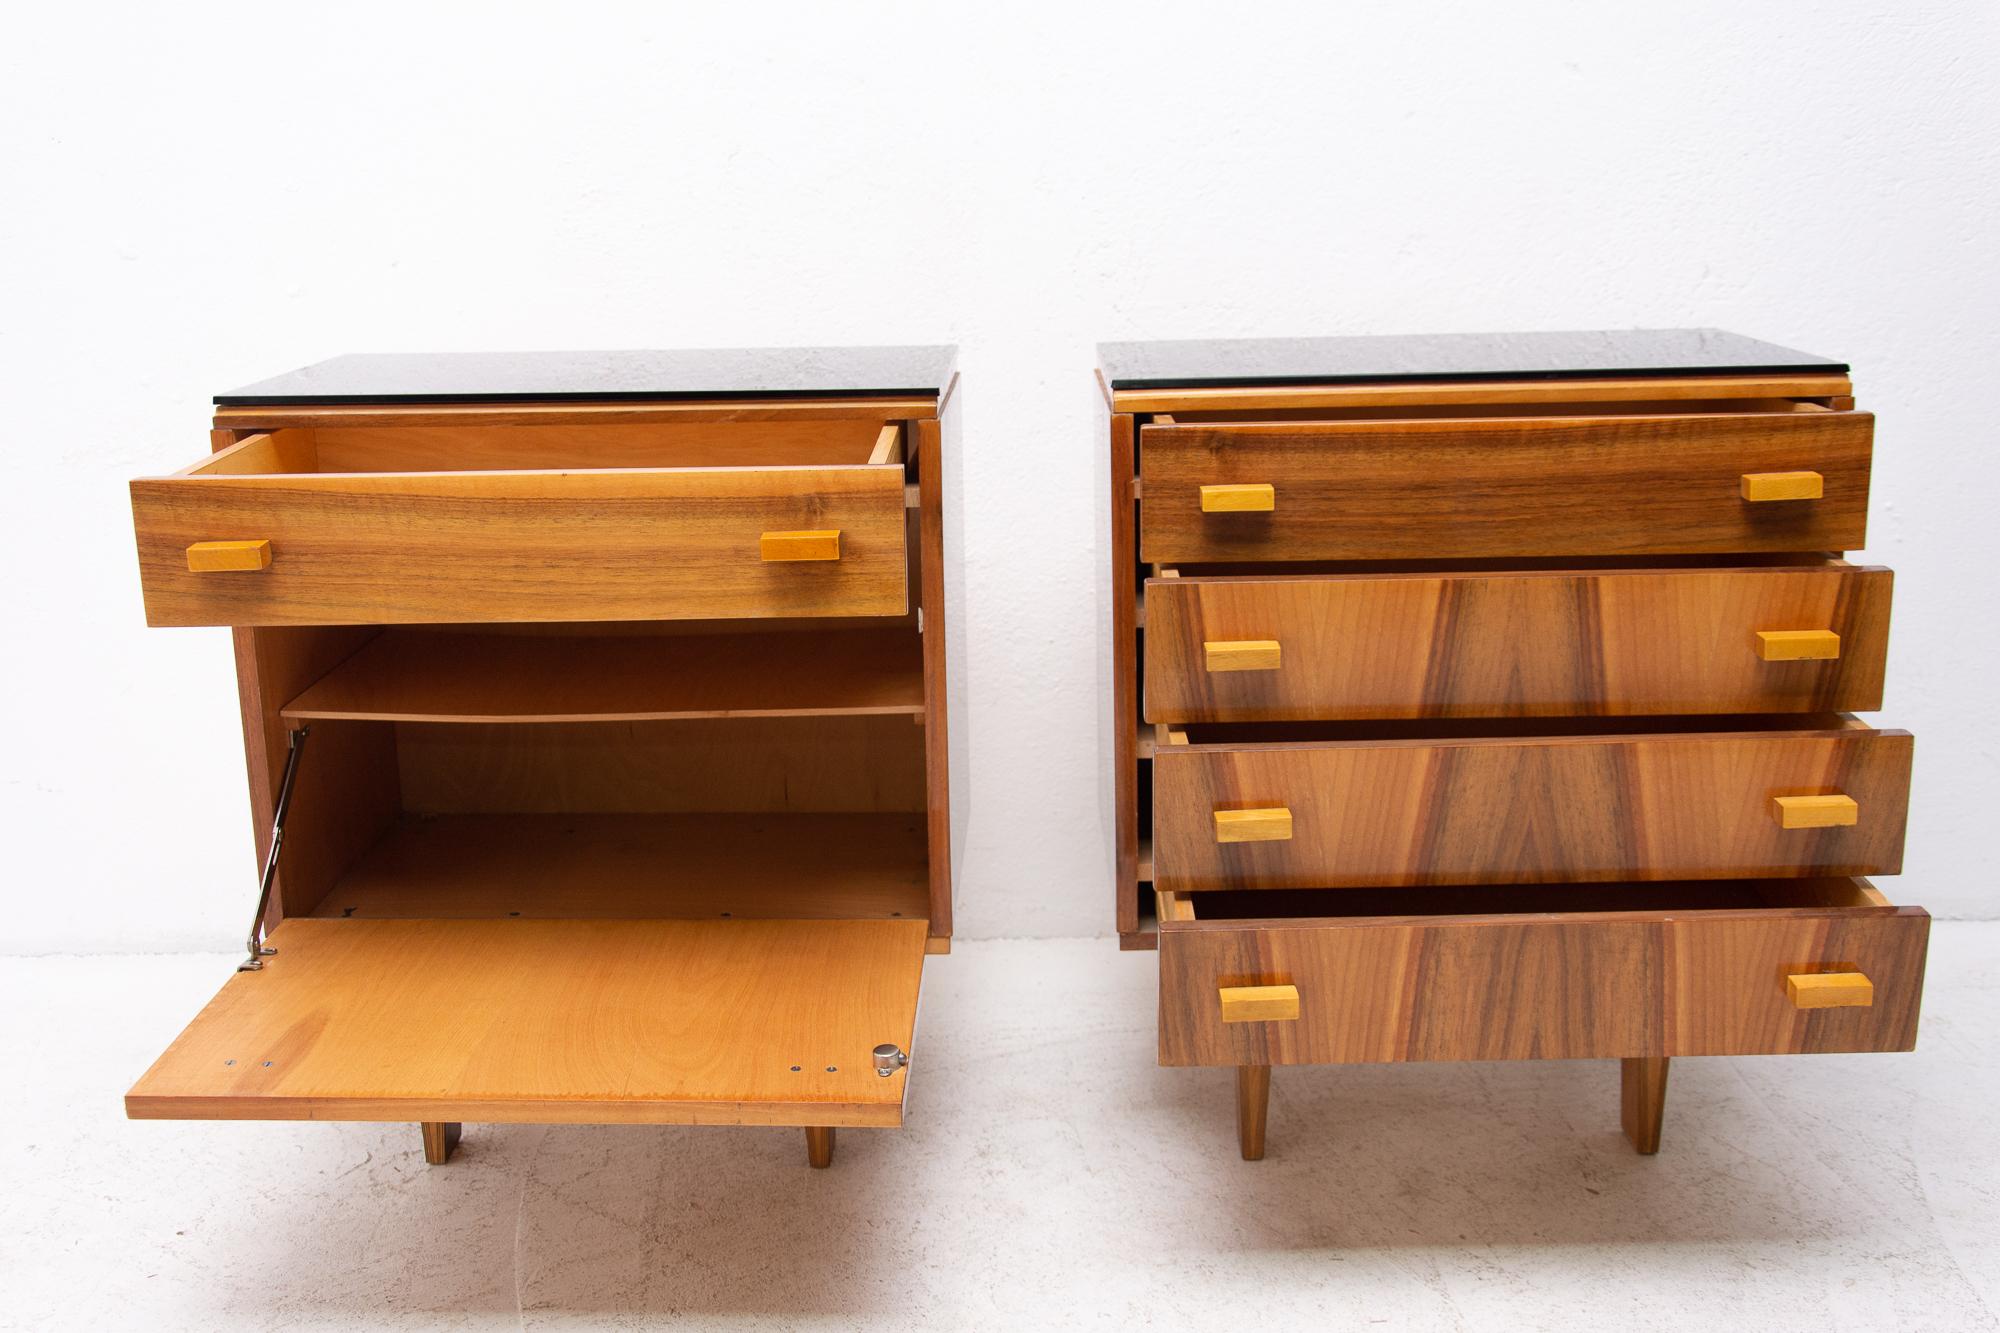 Midcentury Nightstands, Chest of Drawers by Nový Domov, 1970s, Czechoslovakia 1